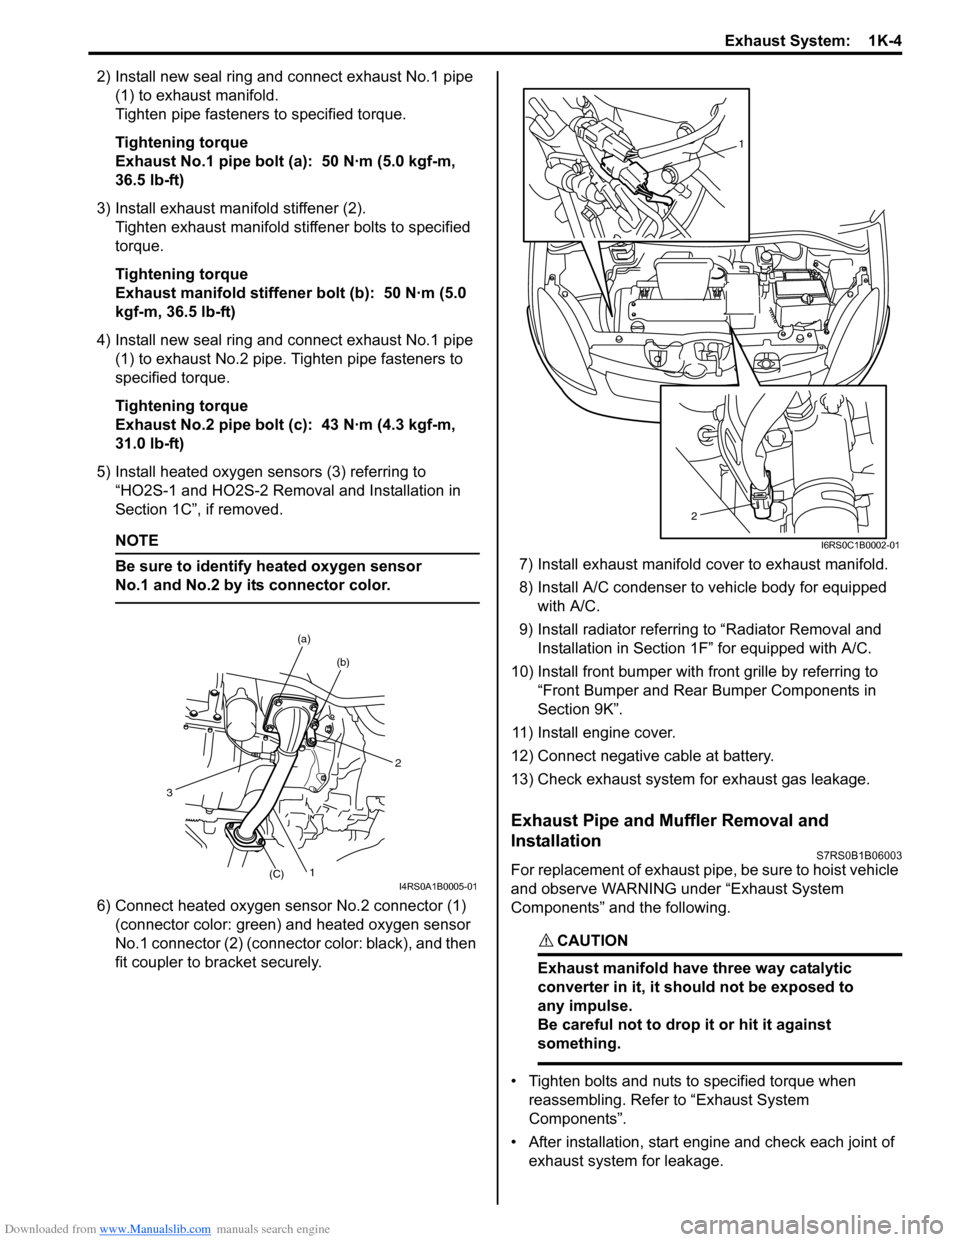 SUZUKI SWIFT 2005 2.G Service Workshop Manual Downloaded from www.Manualslib.com manuals search engine Exhaust System:  1K-4
2) Install new seal ring and connect exhaust No.1 pipe (1) to exhaust manifold.
Tighten pipe fasteners to specified torqu